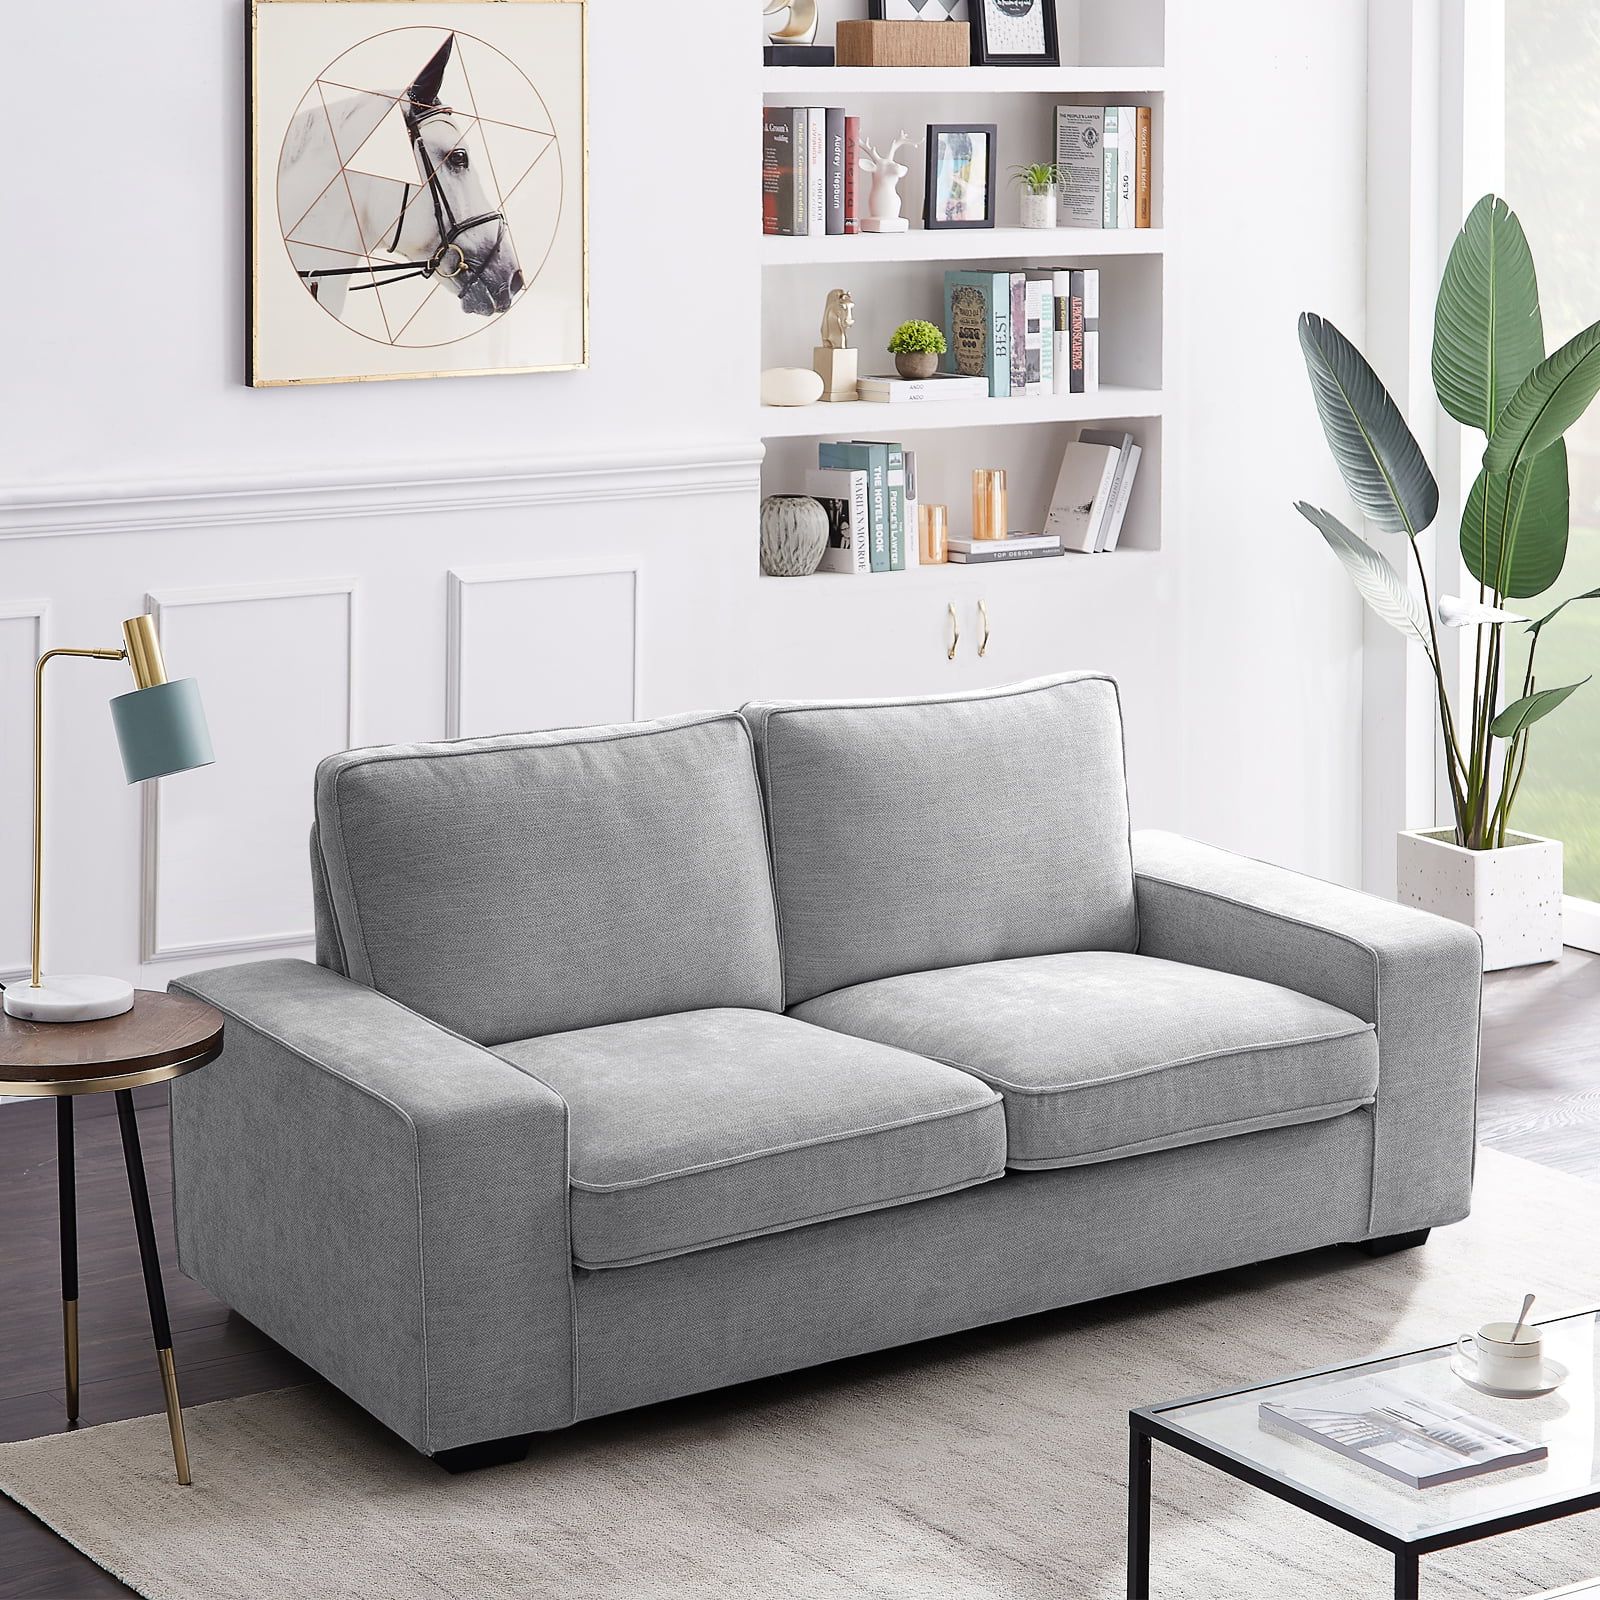 71.25" Modern Loveseat Sofa With Solid Wood Frame, Living Room Chair,  Chenille Couches For Small Spaces, Removable Back Cushion And Easy,  Tool Free Assembly (light Grey) – Walmart Pertaining To Modern Loveseat Sofas (Gallery 3 of 20)